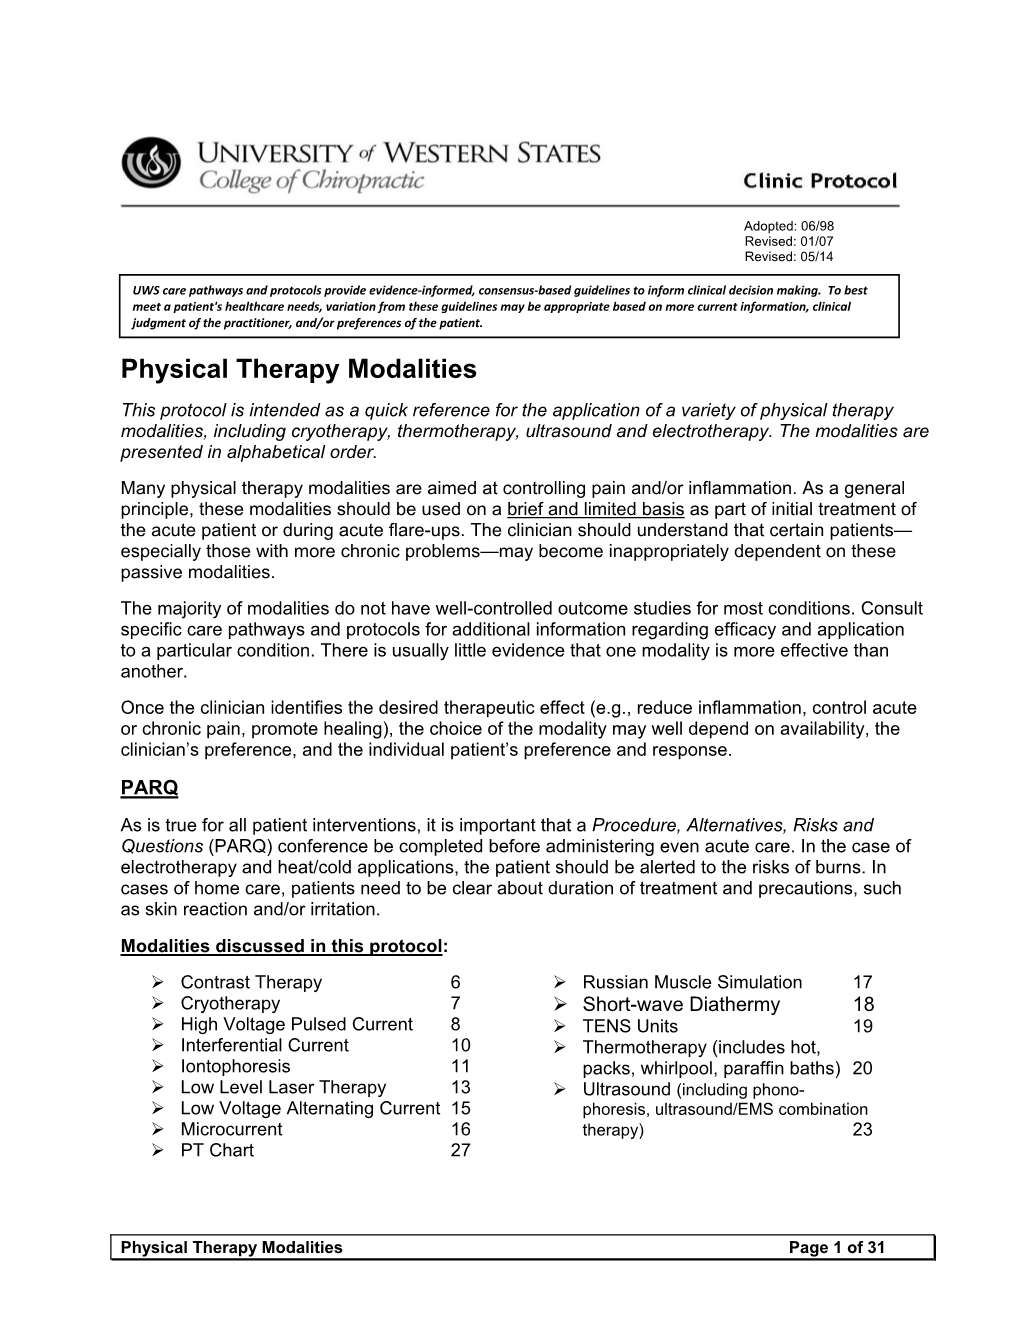 Physical Therapy Modalities